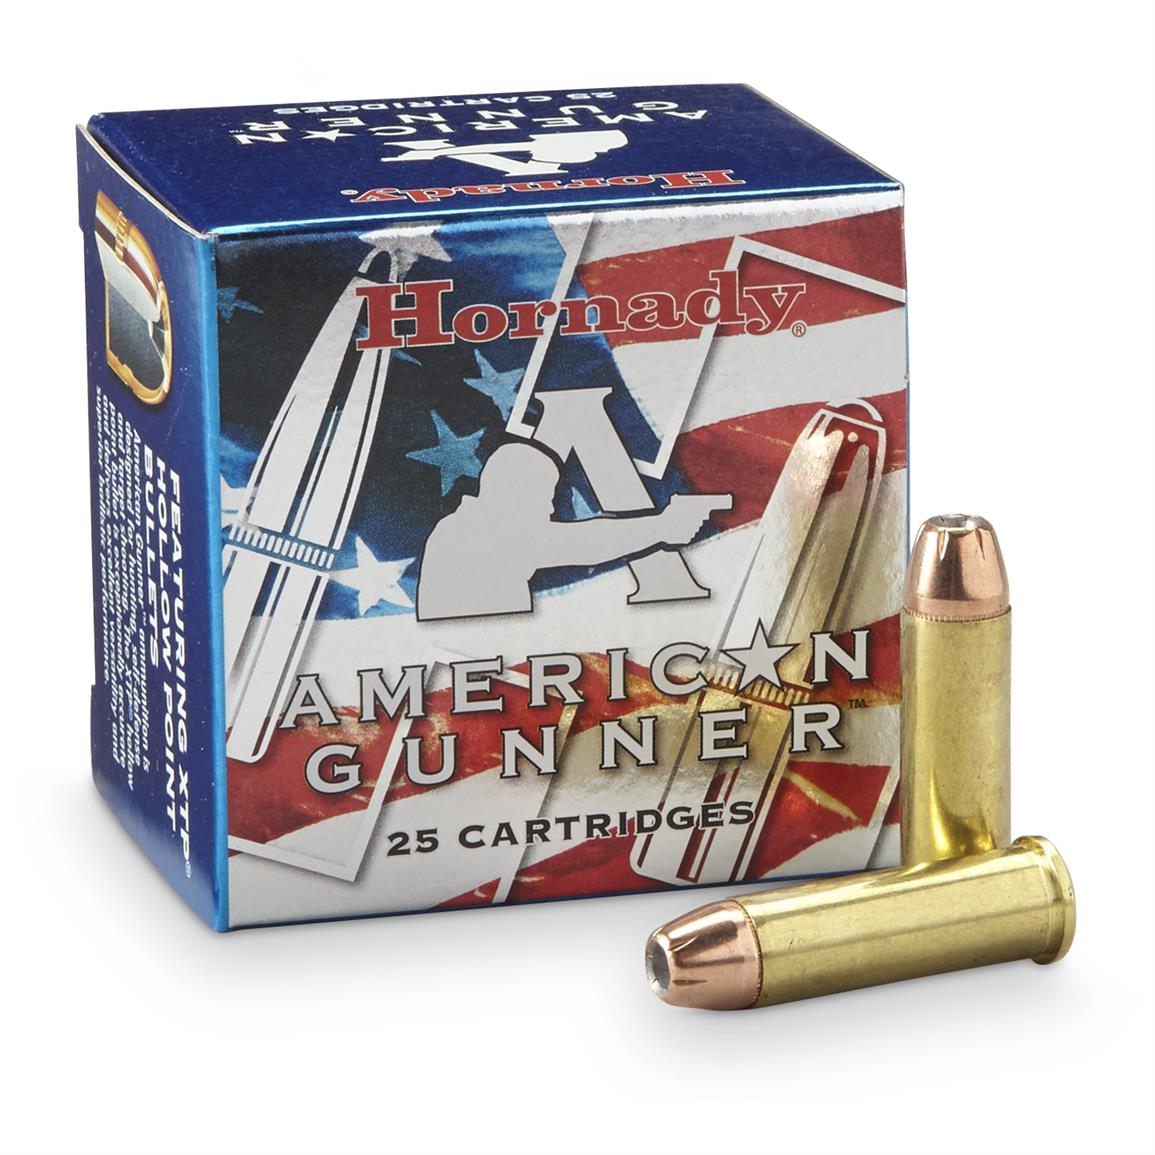 45 ACP (Auto) Ammo - 20 Rounds of 185 Grain Jacketed 